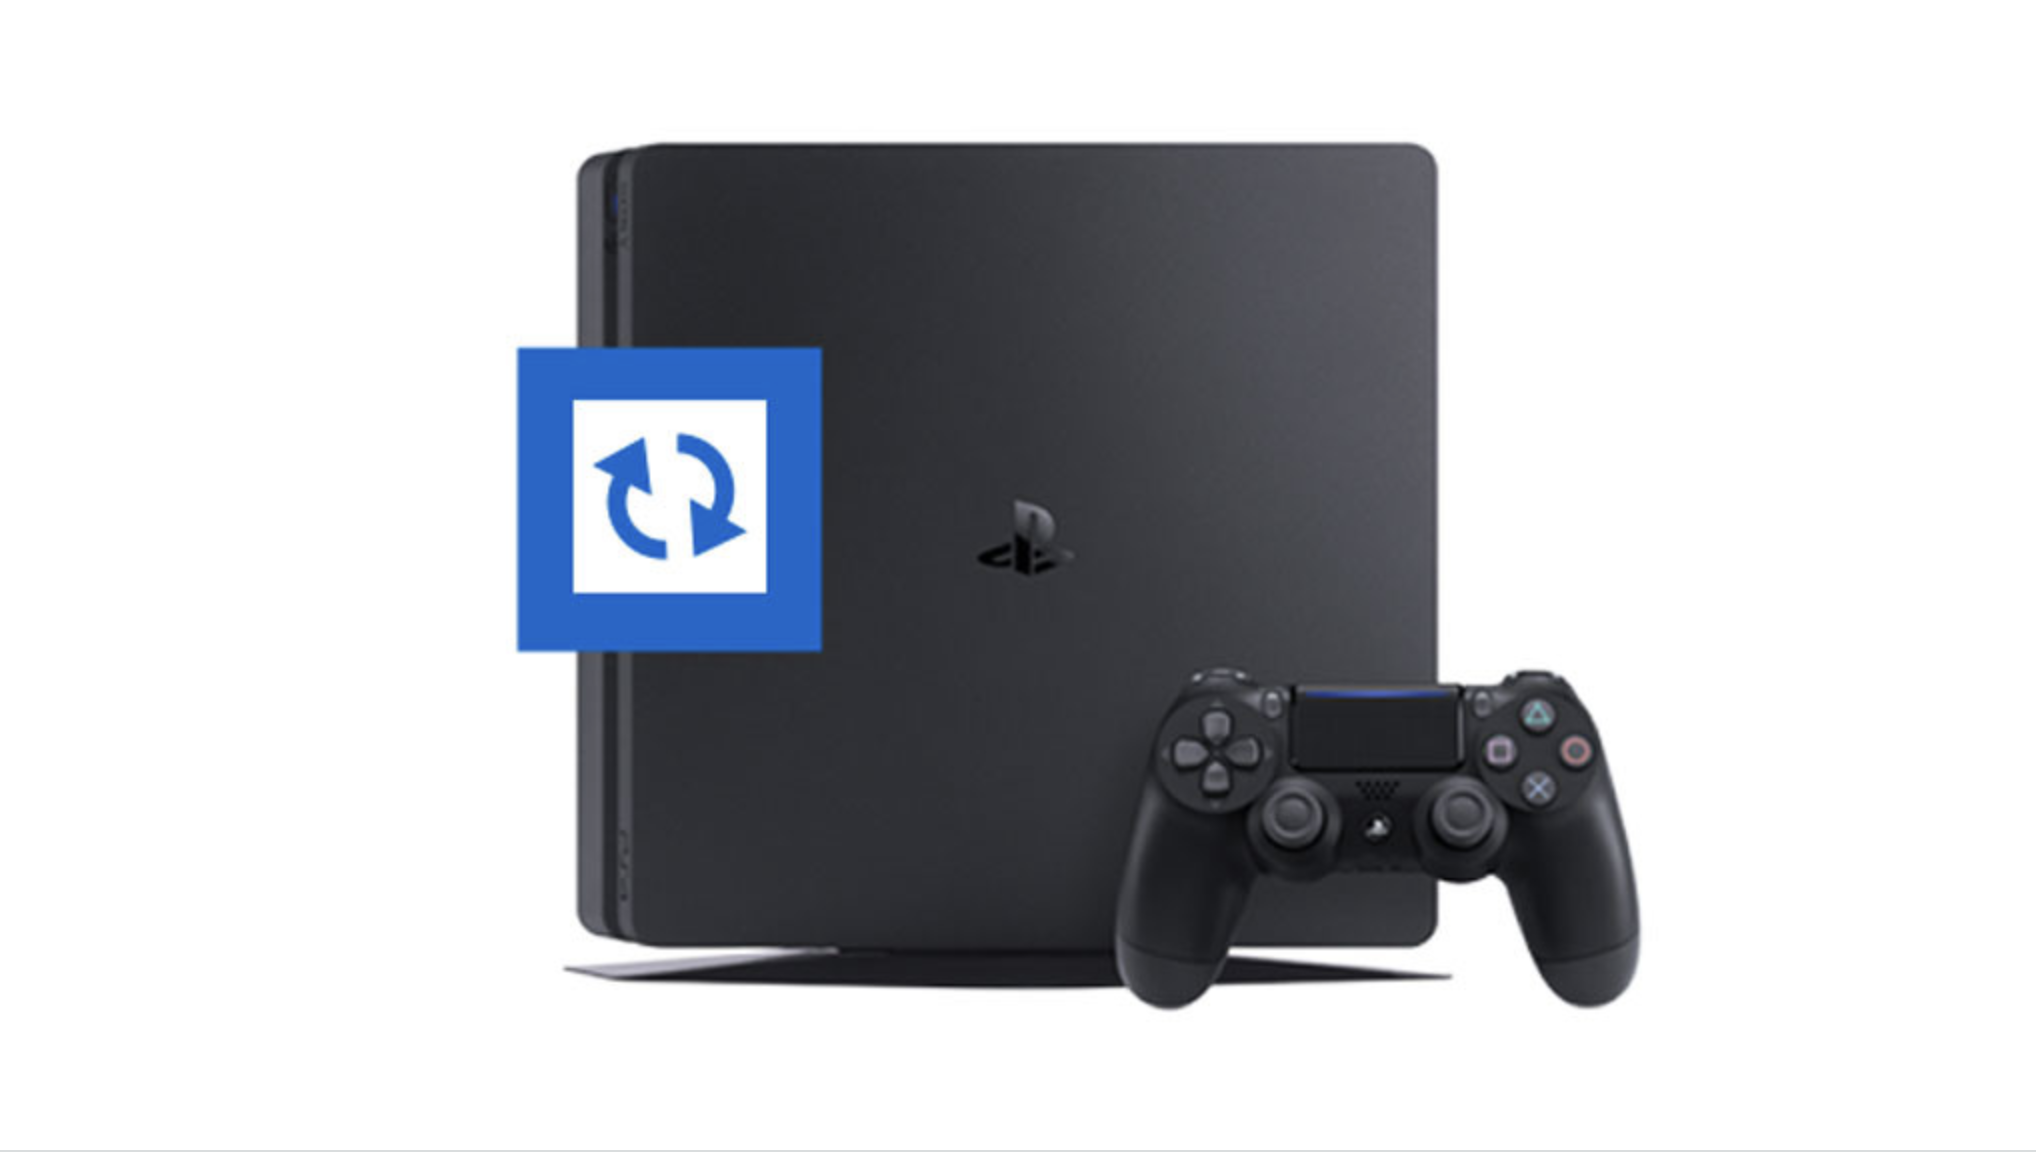 Ps4 6.72. Плейстейшен 8. Ds50 ps4. Ps4 Pro Firmware. Ps4 Pro 9.00.